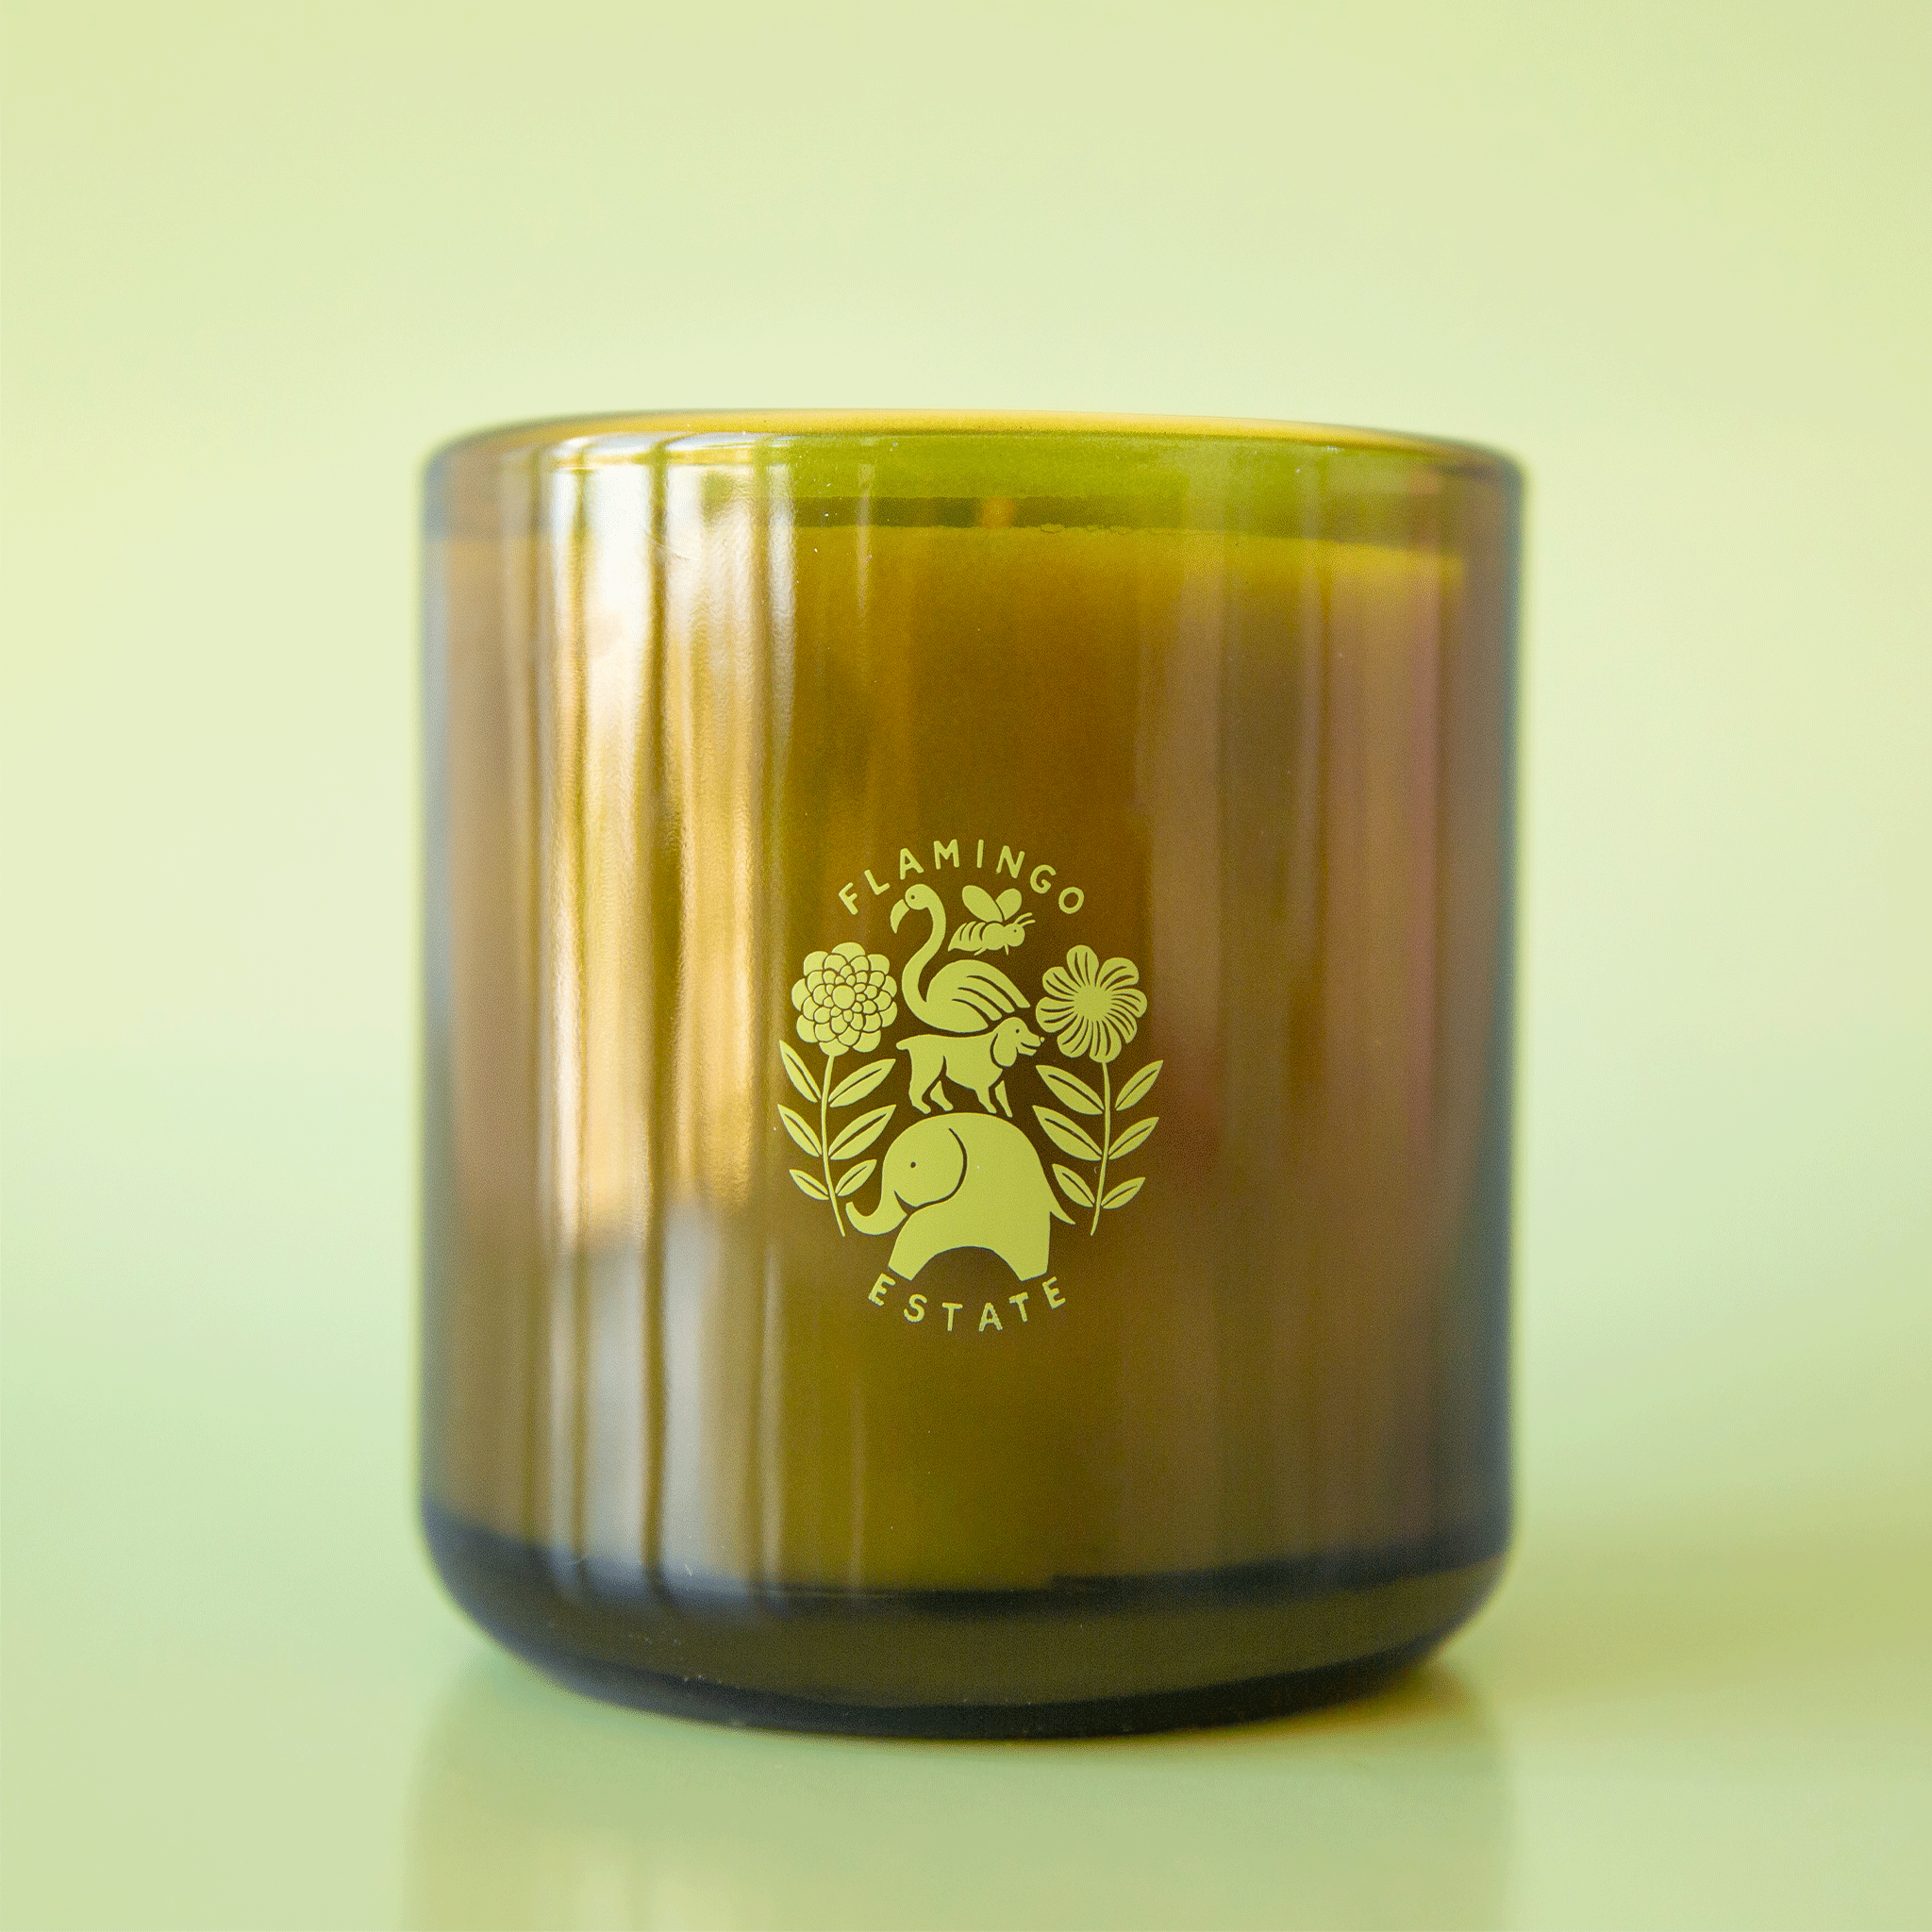 On a green background is a green glass jar candle with a logo in the center that reads, "Flamingo Estate".